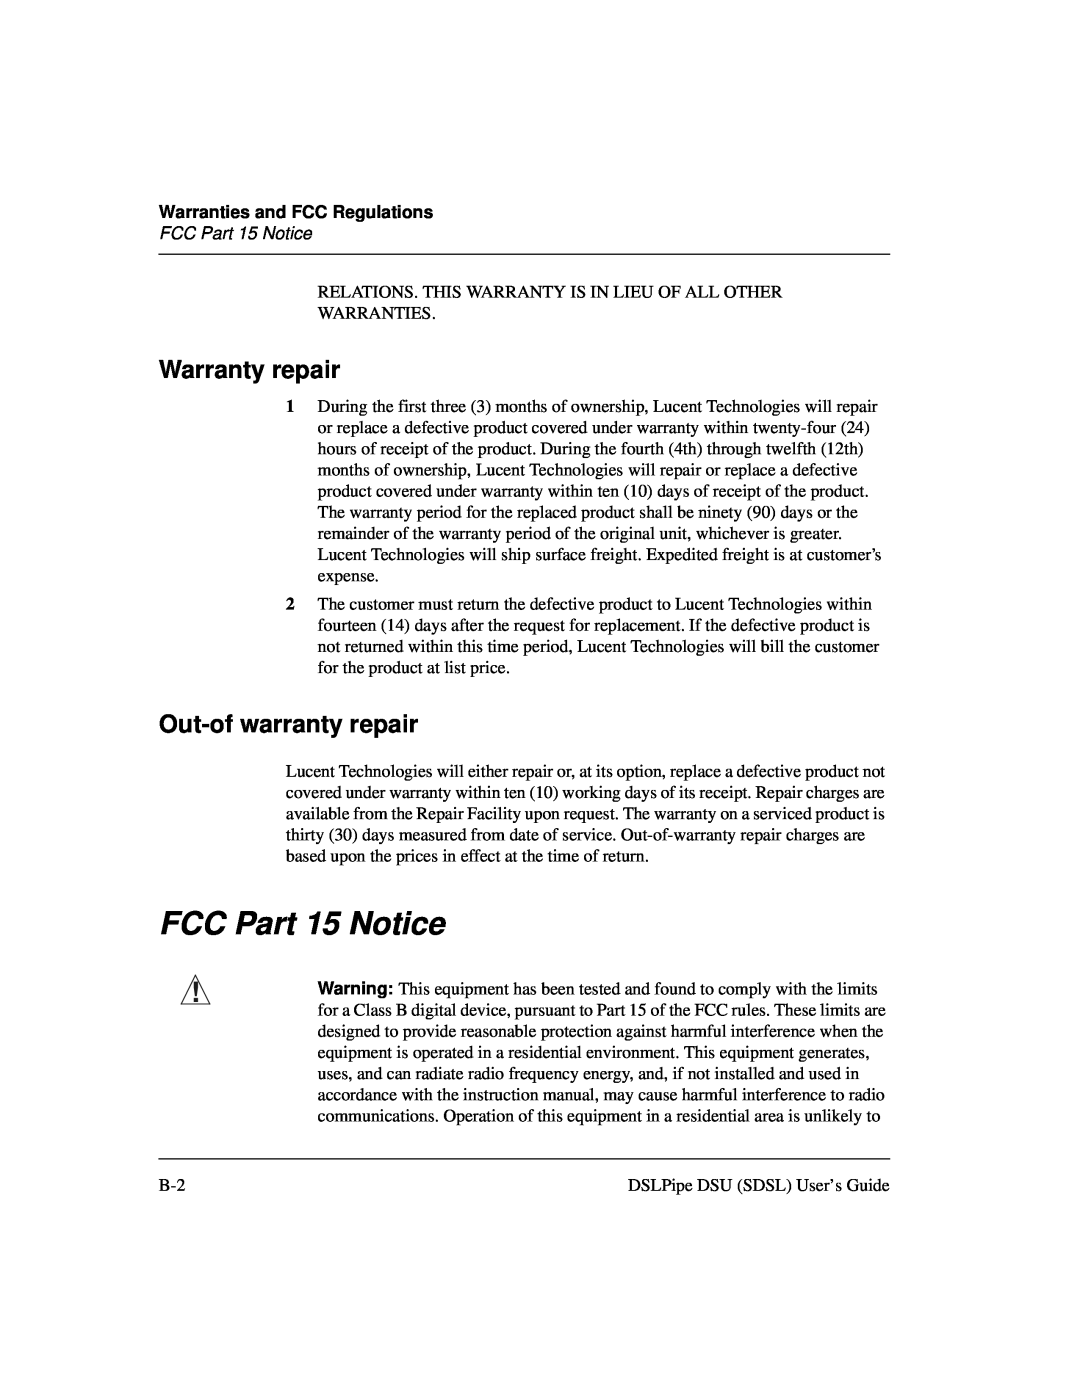 Lucent Technologies 7820-0657-001 manual FCC Part 15 Notice, Warranty repair, Out-of warranty repair 